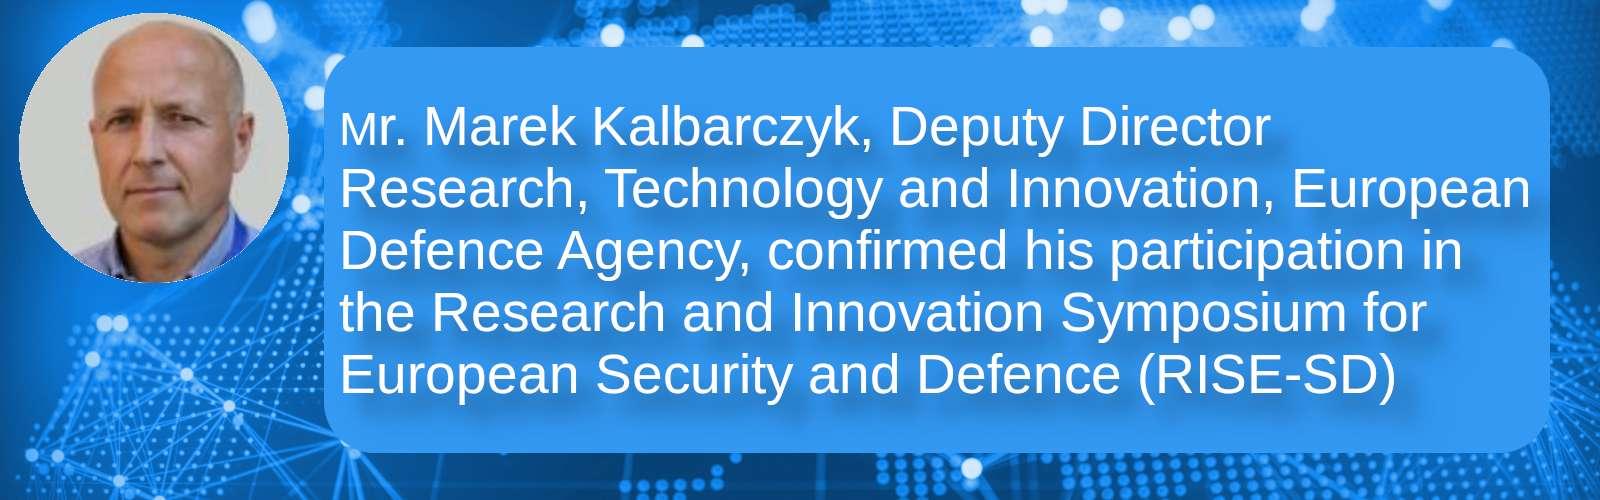 Mr. Marek Kalbarczyk, Deputy Director Research, Technology and Innovation, European Defence Agency, confirmed his participation in the Research and Innovation Symposium for European Security and Defence (RISE-SD)